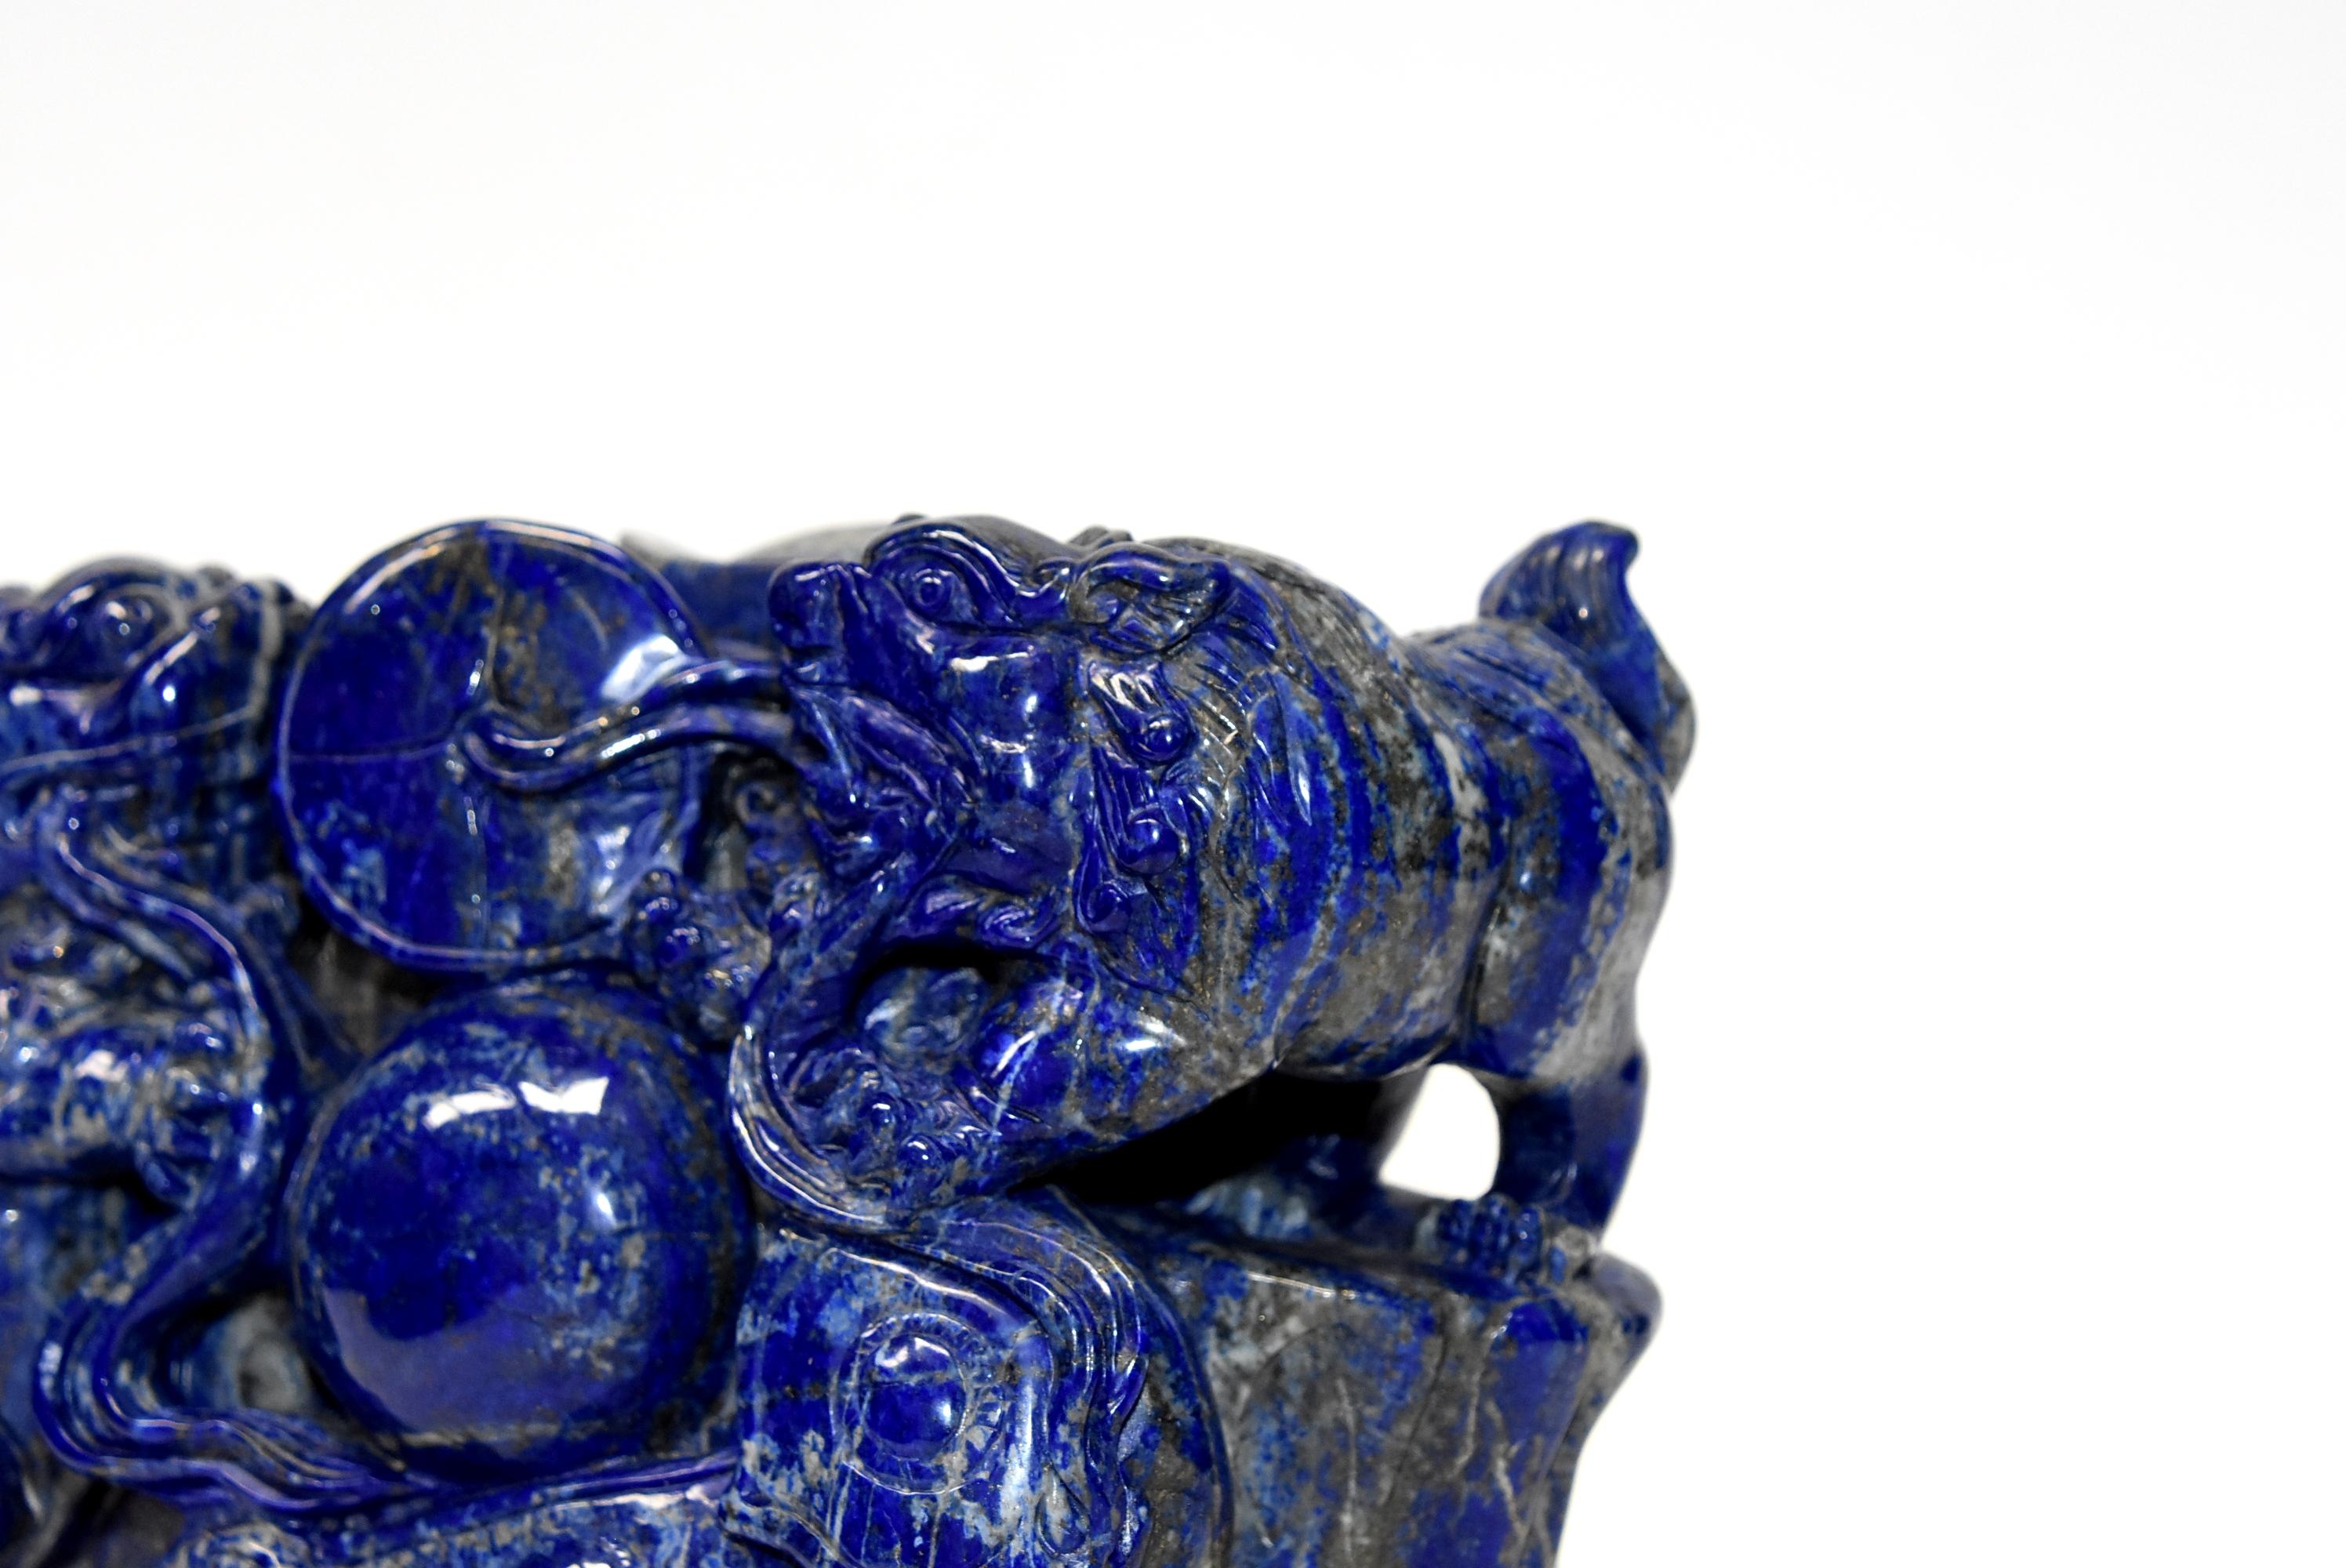 Natural Lapis Lazuli 8 lb Block with Carved Lions 7